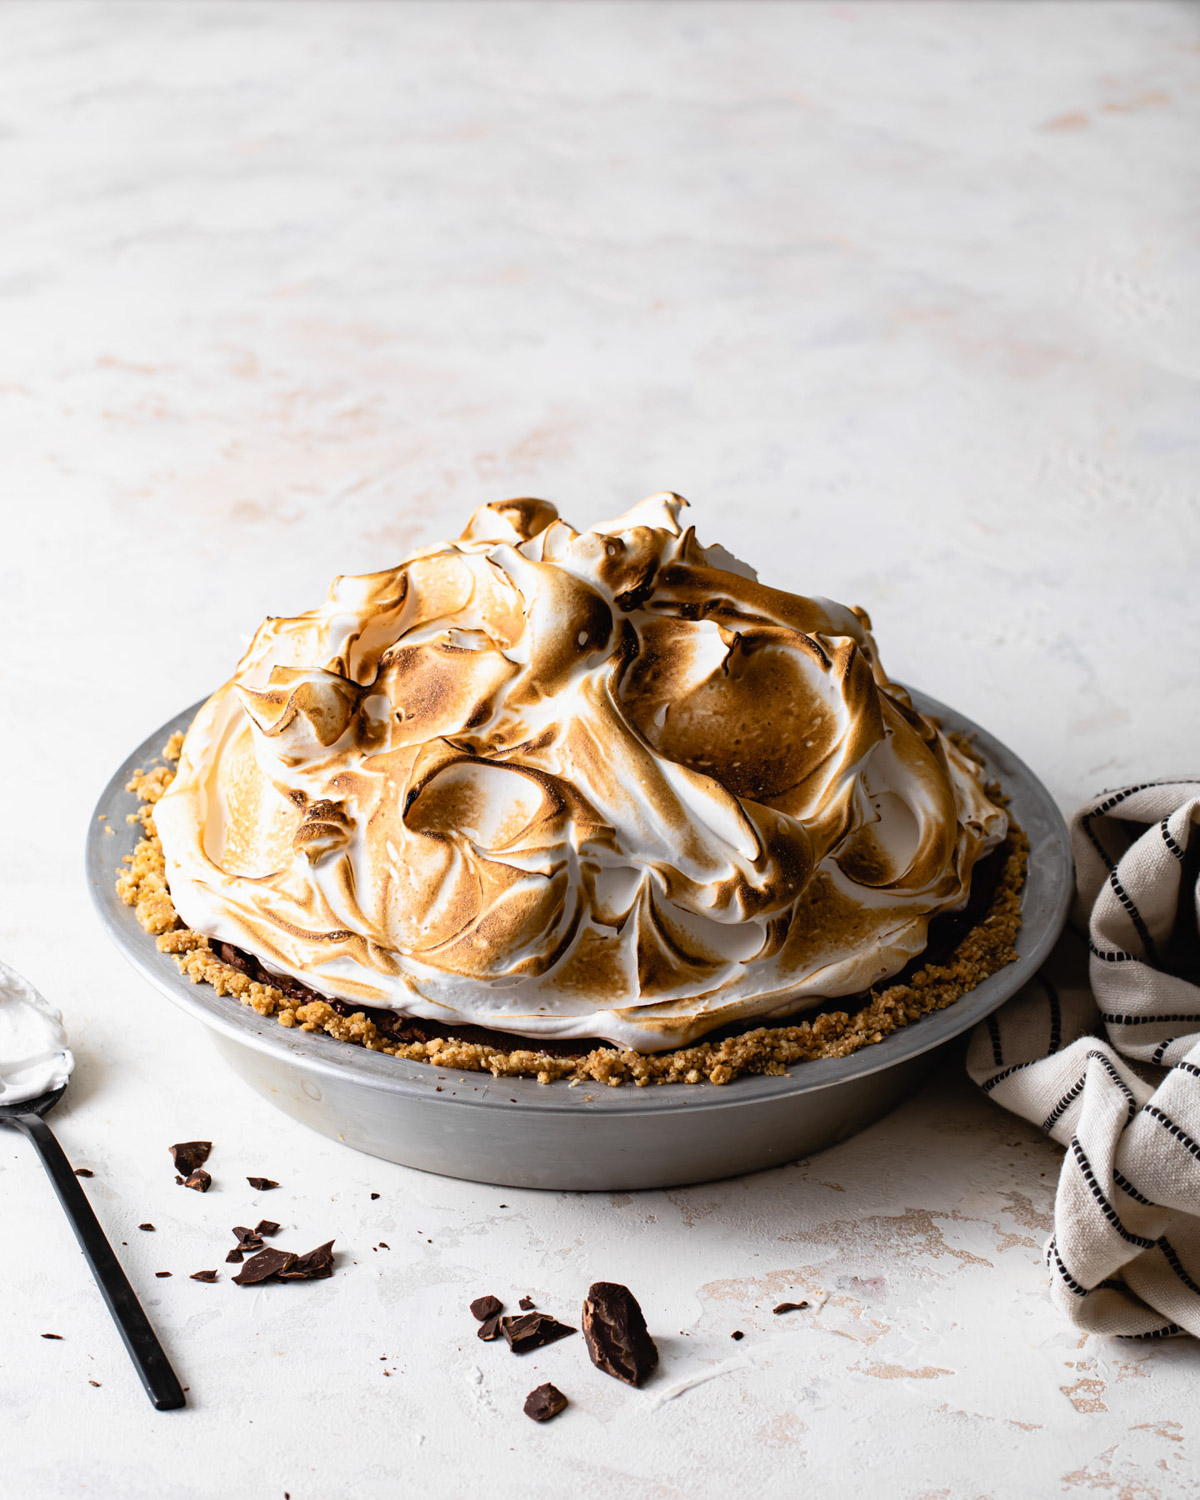 A peanut butter s'mores pie with toasted meringue topping in a pie tin